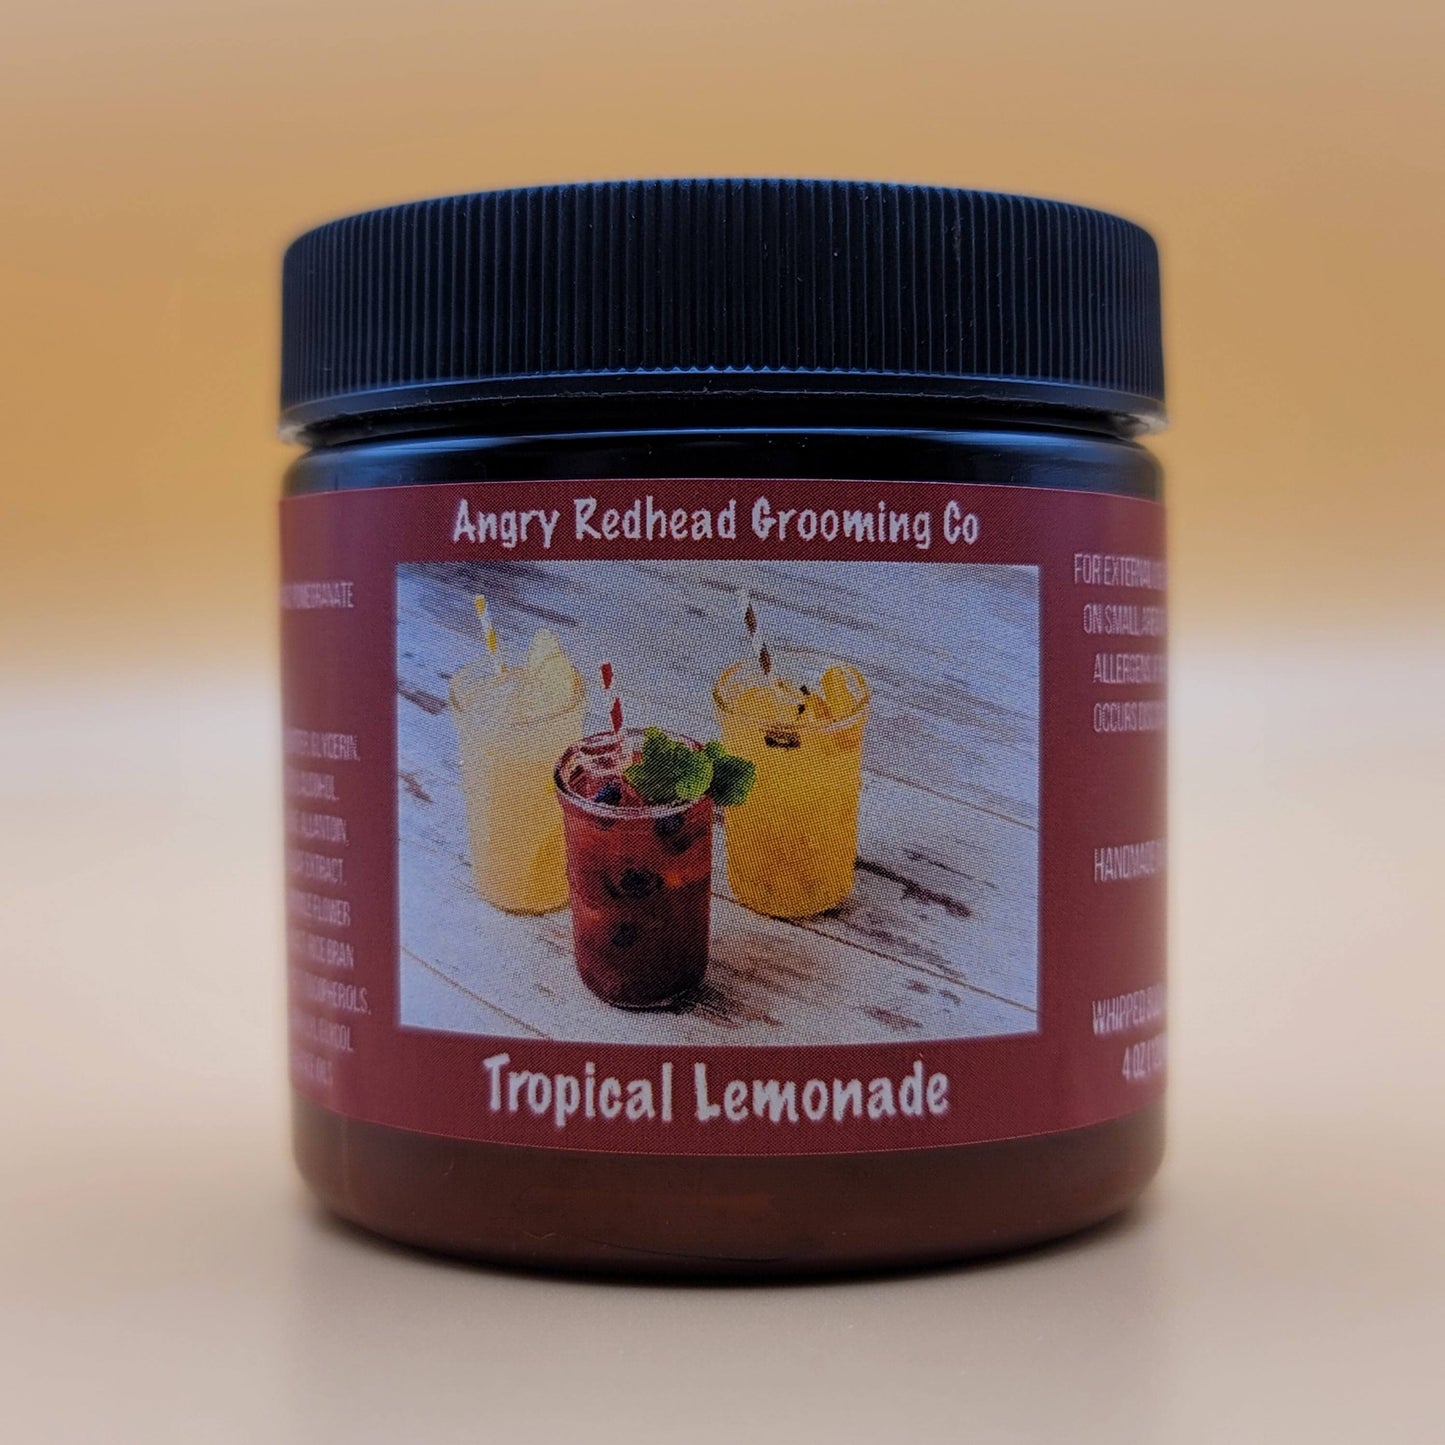 Tropical Lemonade Body Butter by Angry Redhead Grooming Co - angryredheadgrooming.com